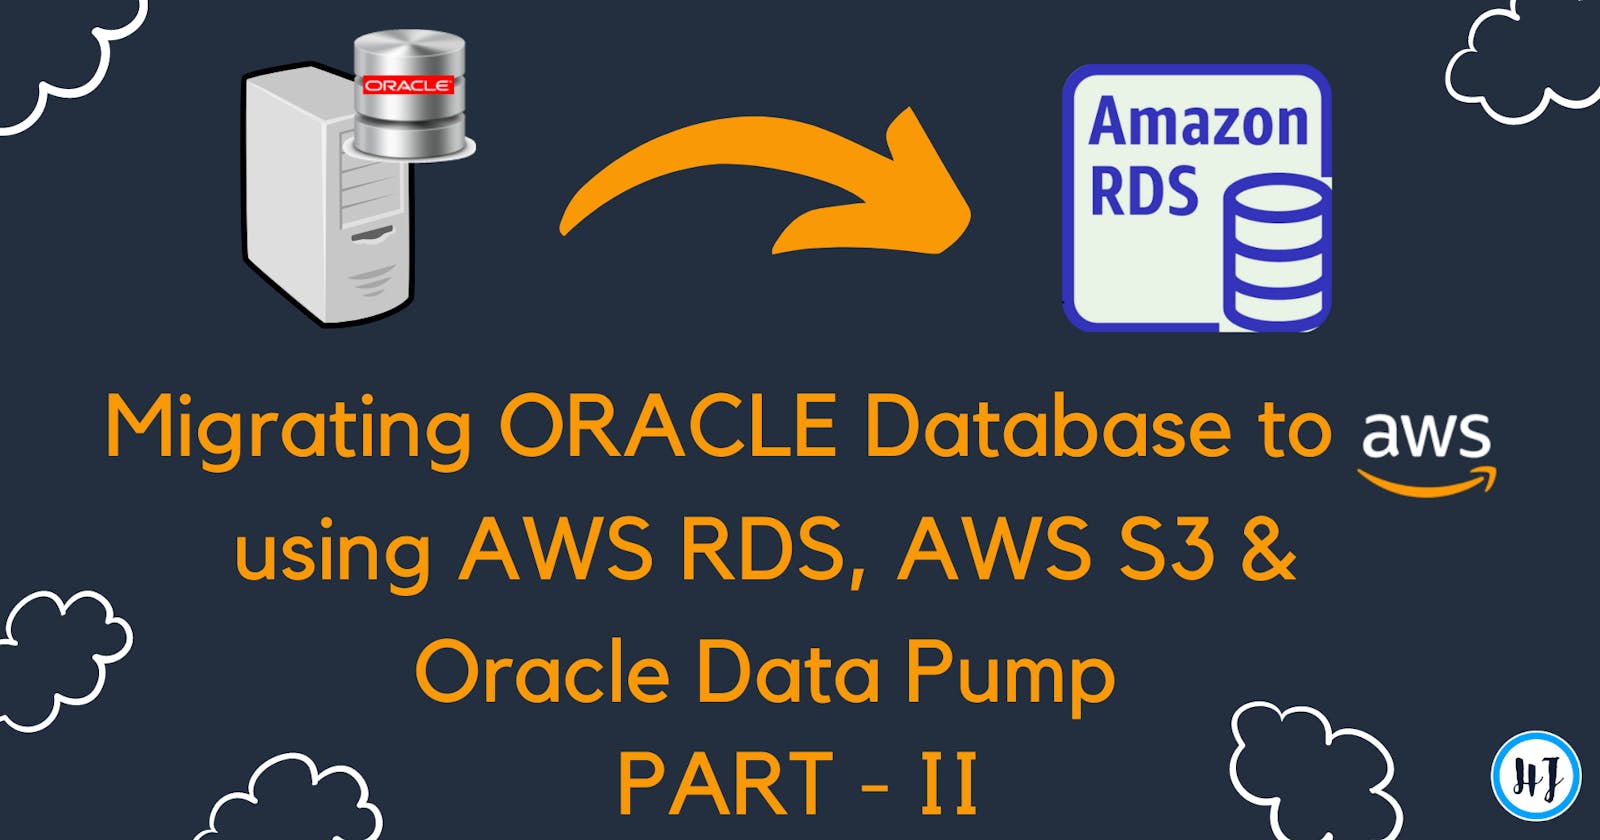 Migrating Oracle Database to AWS Cloud using AWS RDS, AWS S3 and Oracle Data Pump (PART - II)